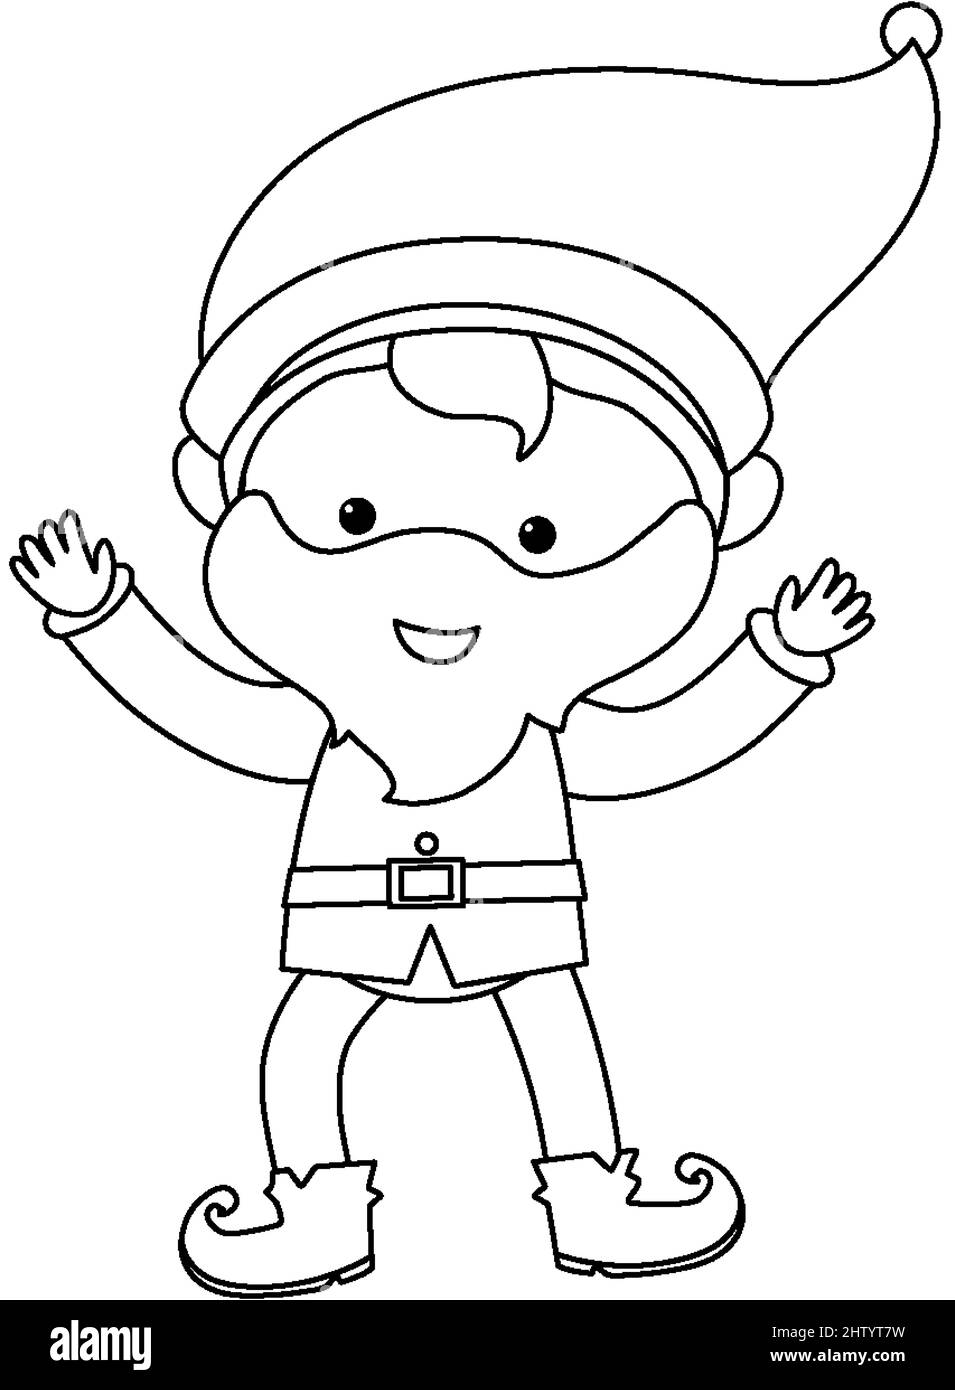 Cute elf doodle outline for colouring illustration Stock Vector